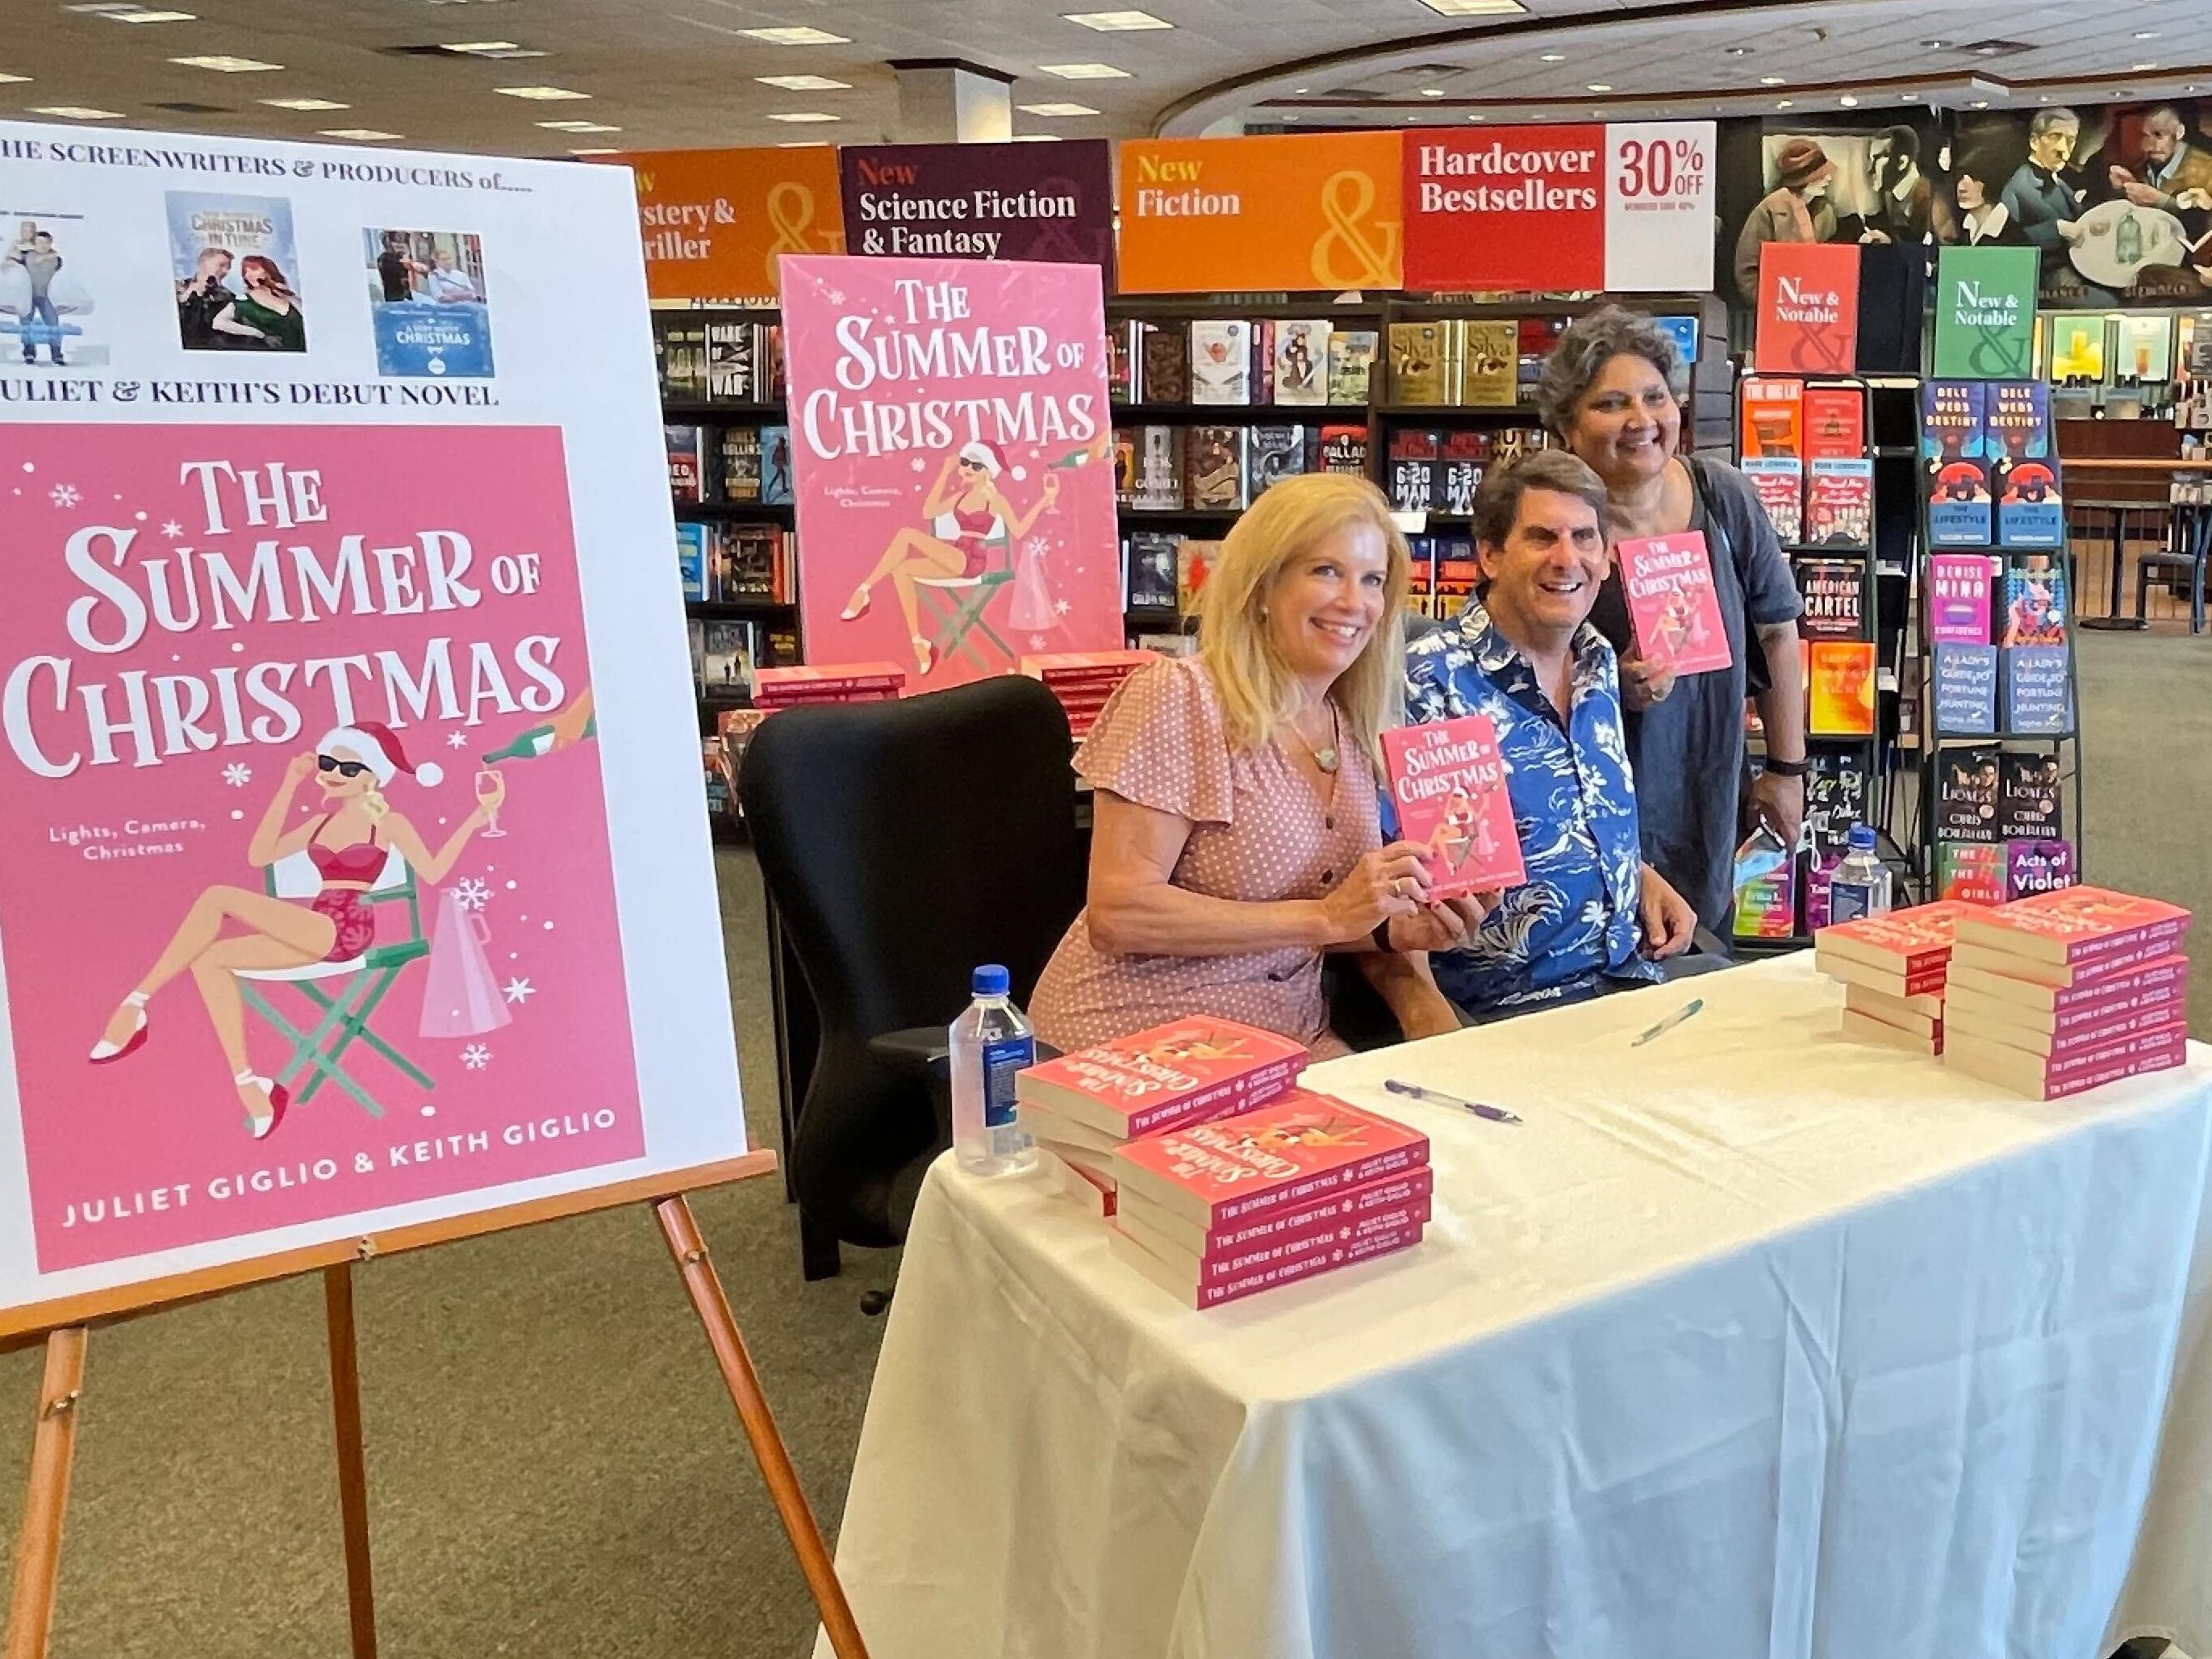 SUNY Oswego faculty member Juliet Giglio and her husband Keith, a Syracuse University faculty member, teamed up to write a new novel, "The Summer of Christmas"; here they participate in a book signing